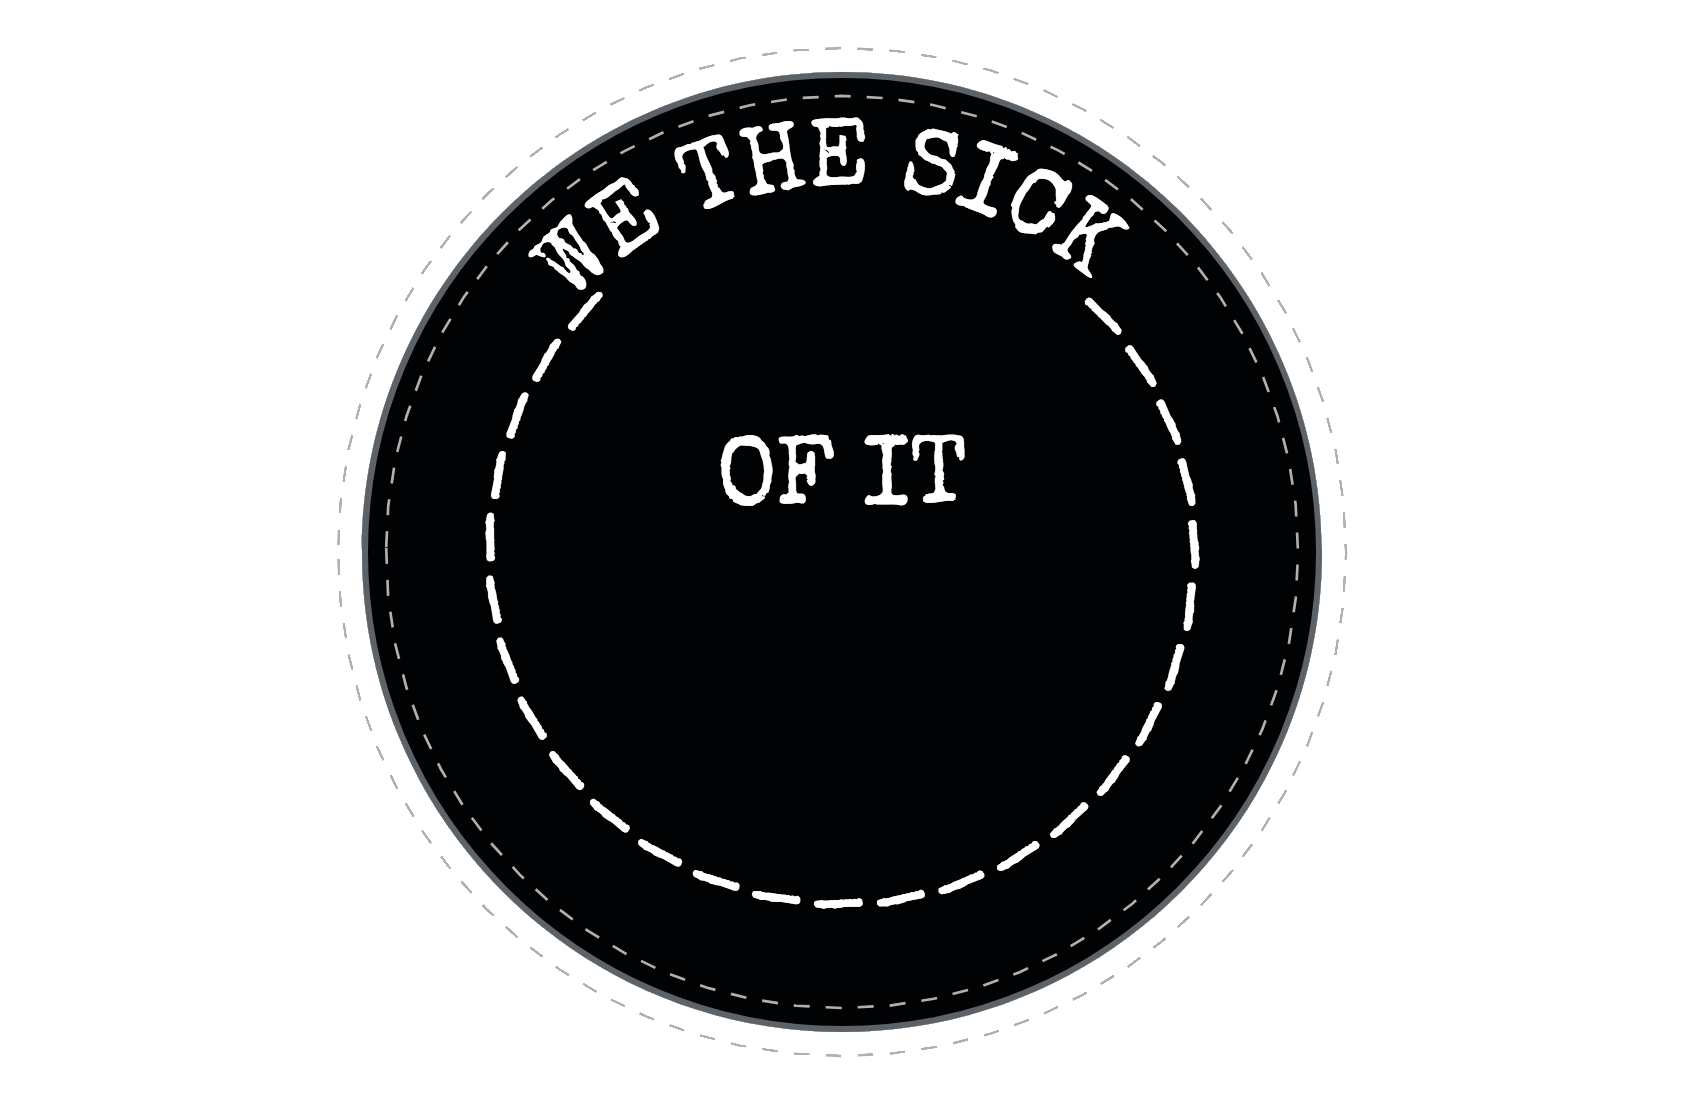 A circle of dashes with words in typewriter font capitals reads around the edge "WE THE SICK" with "OF IT" in the centre